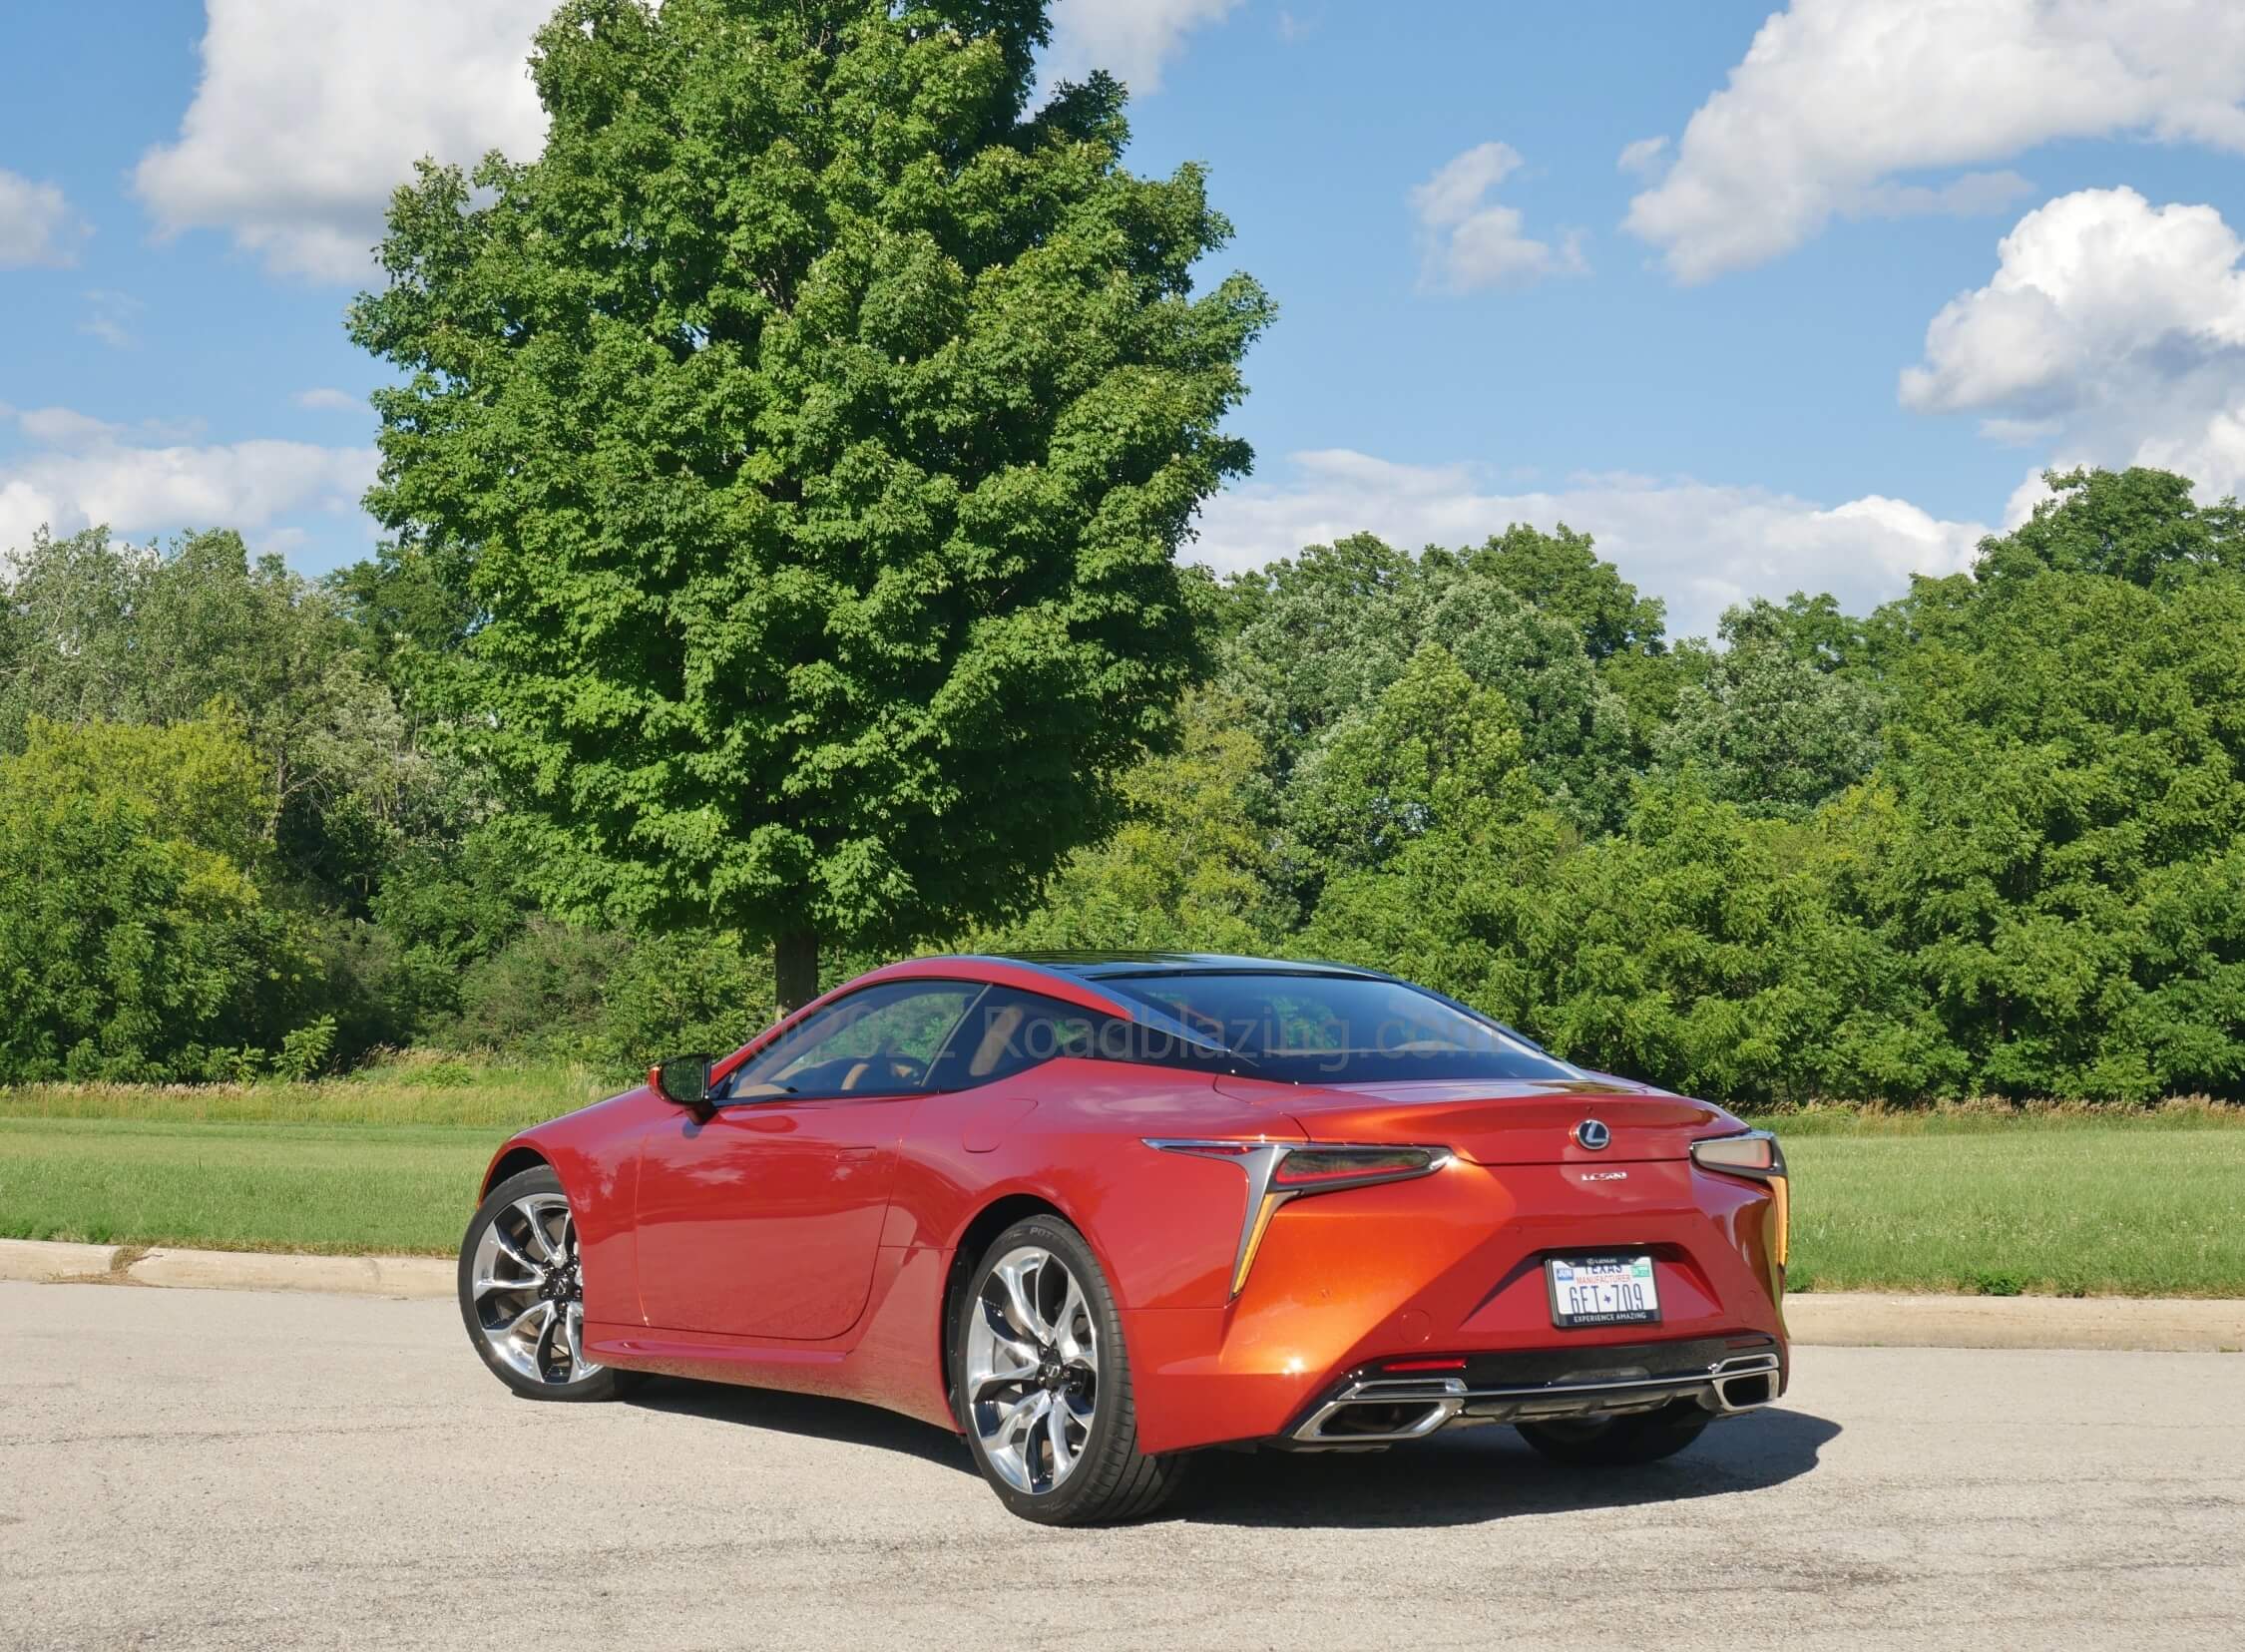 2022 Lexus LC 500: Beauty now available w/ center of gravity reducing woven carbon fiber "floating" roof.